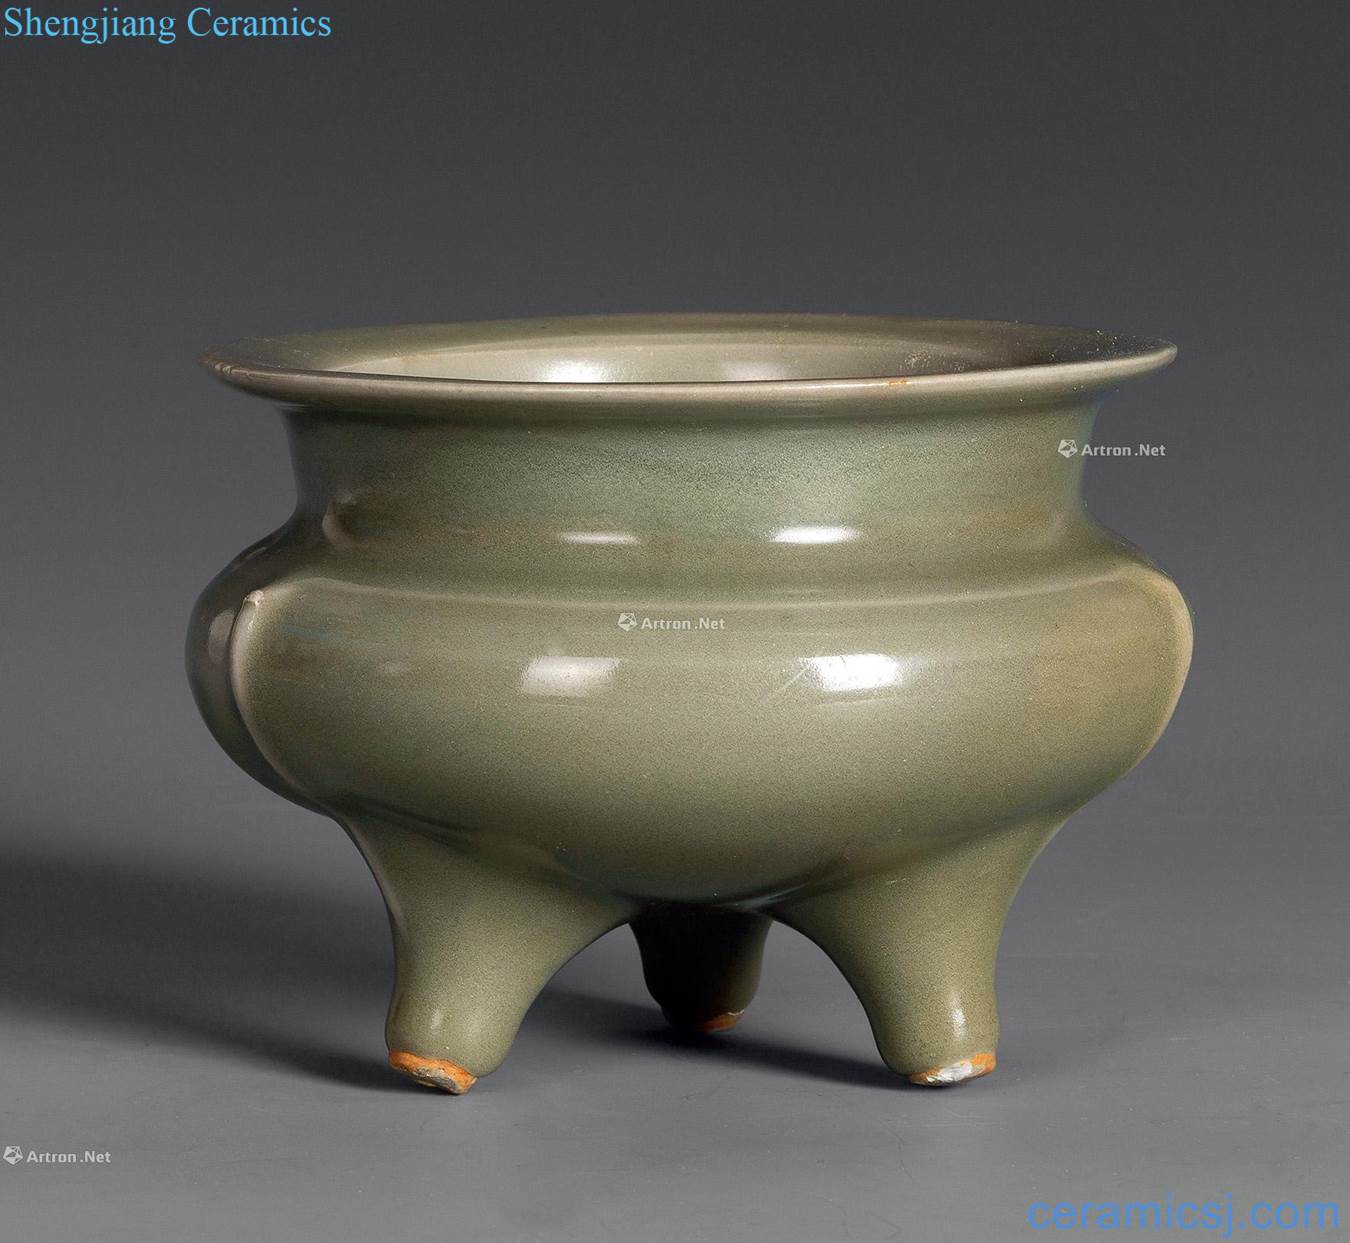 The song dynasty Longquan three feet by furnace